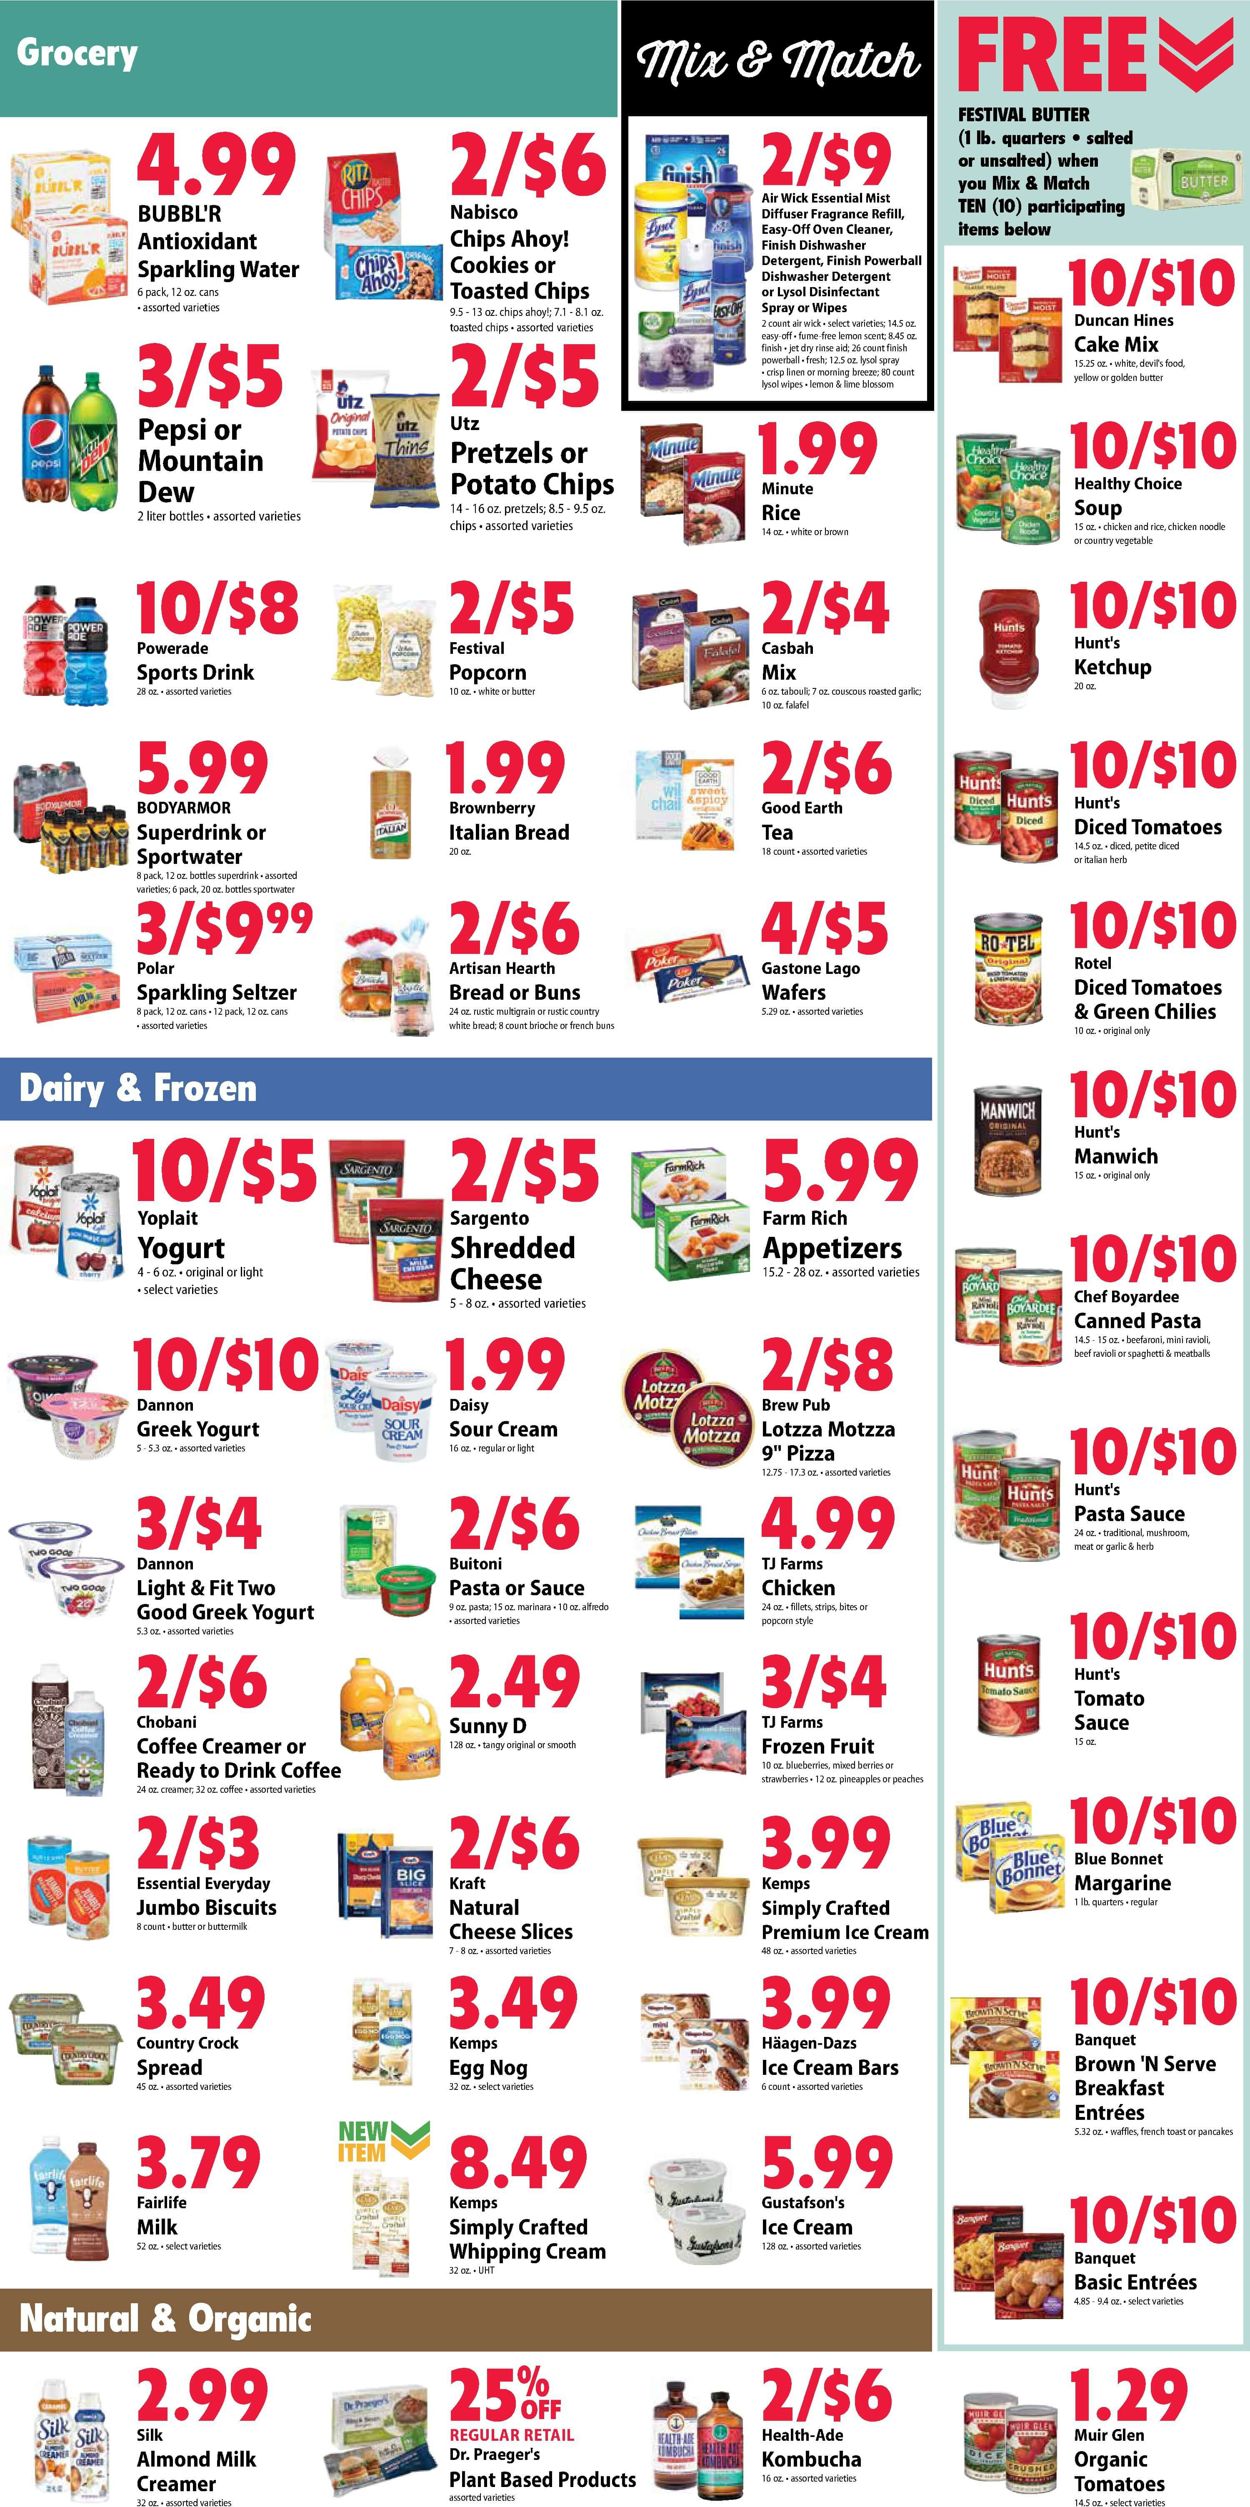 Festival Foods HOLIDAY 2021 Weekly Ad Circular - valid 11/24-11/30/2021 (Page 3)